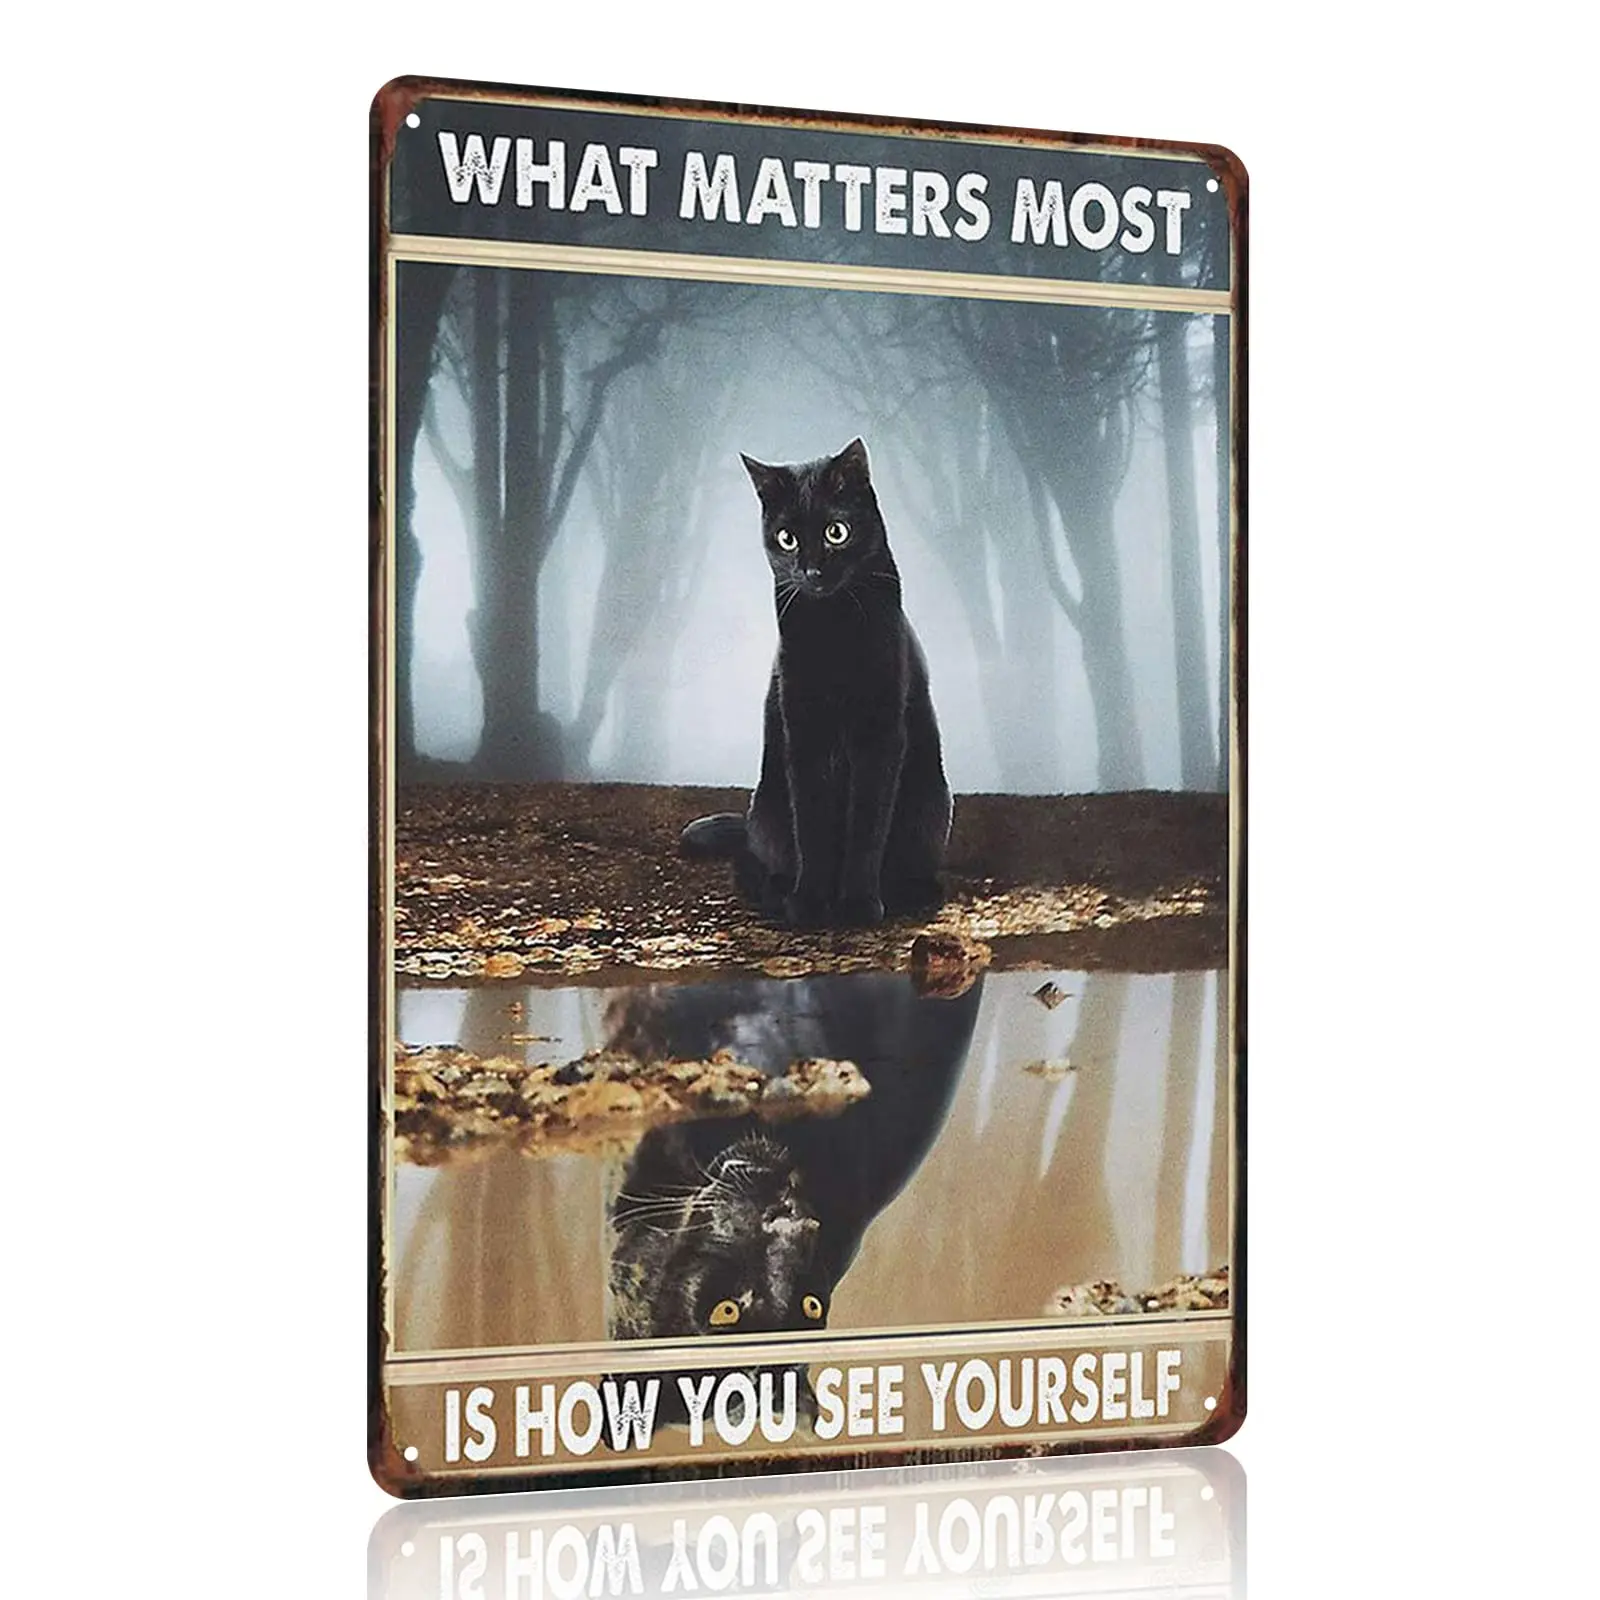 

Black Cat Tin Sign "The Most Important Thing Is How You See Yourself" - Man Cave Bar Poster Metal Art Deco Wall 8 X 12 Inches